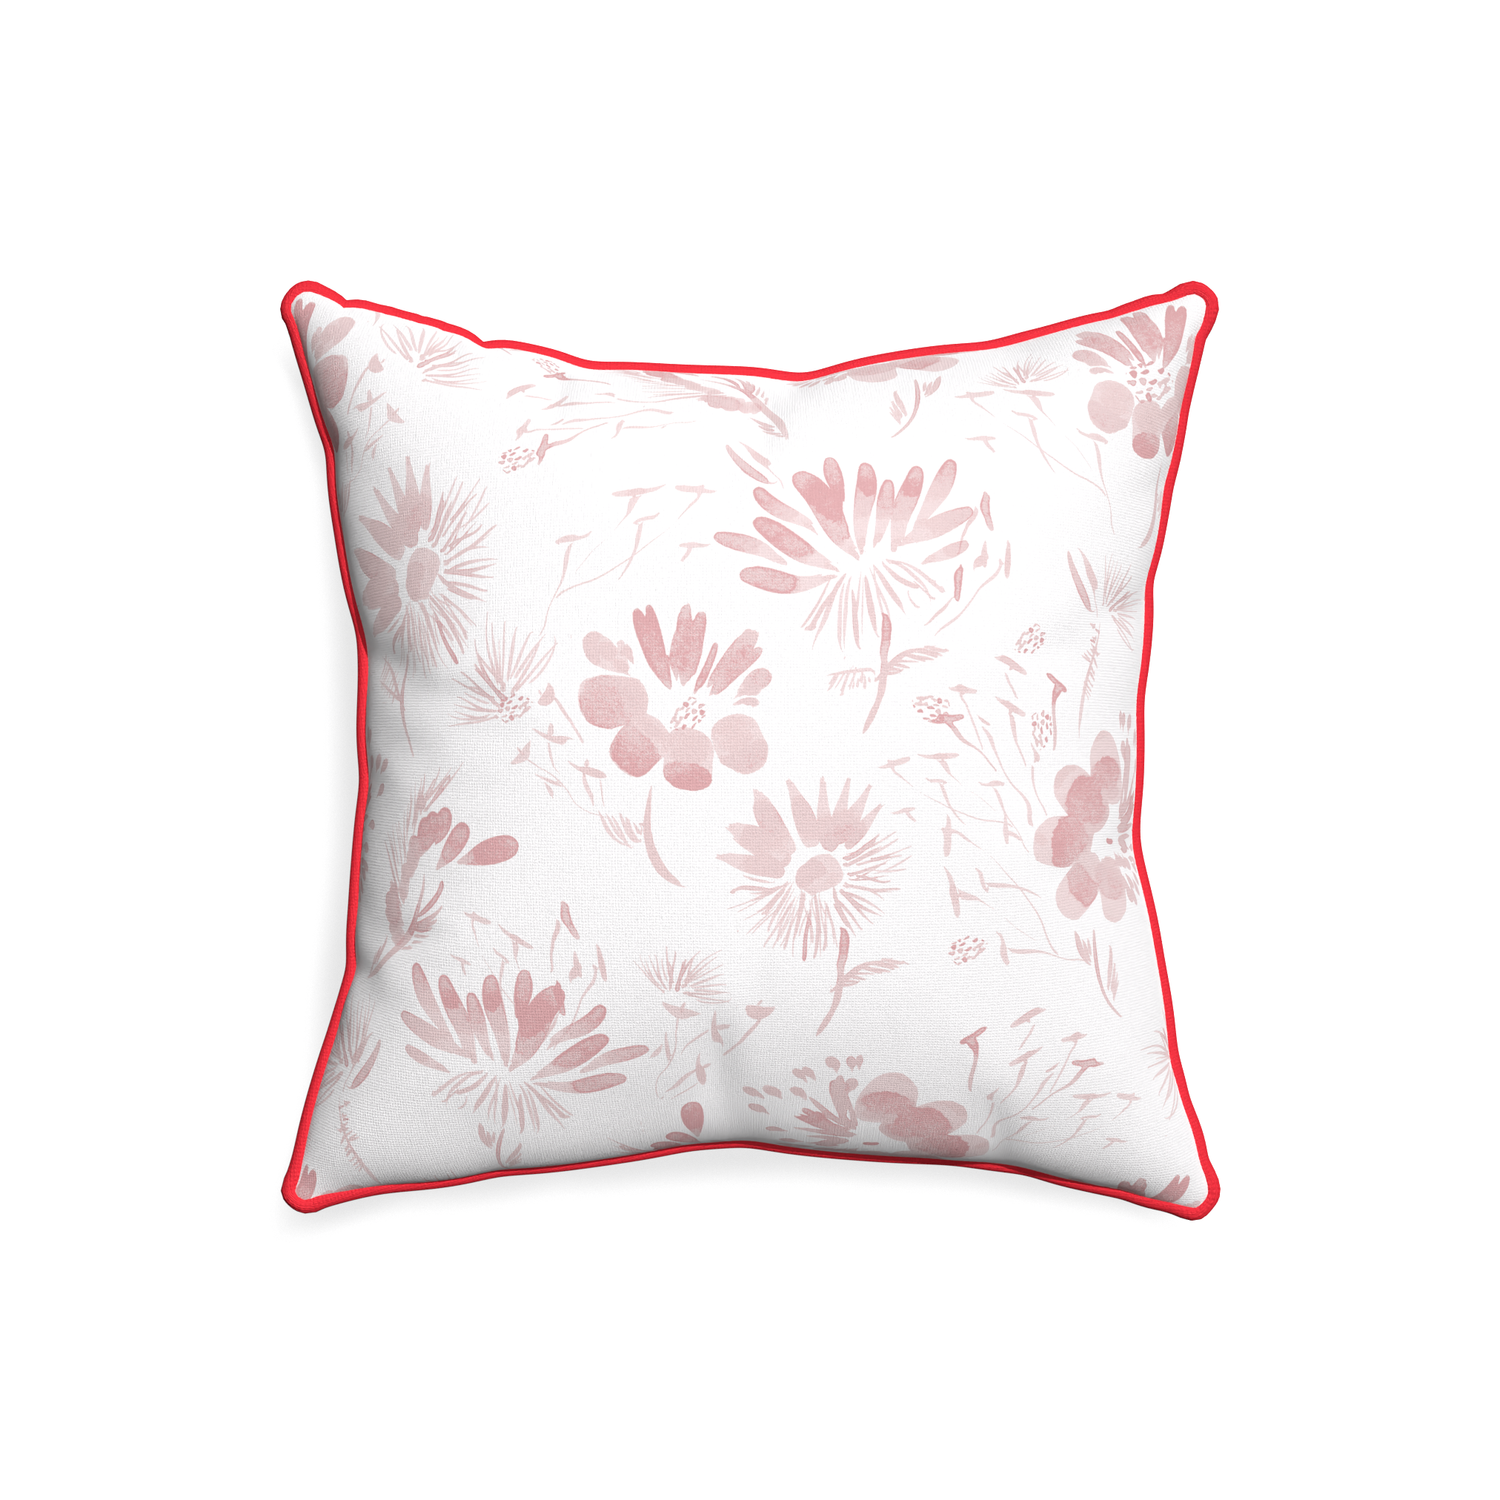 20-square blake custom pink floralpillow with cherry piping on white background